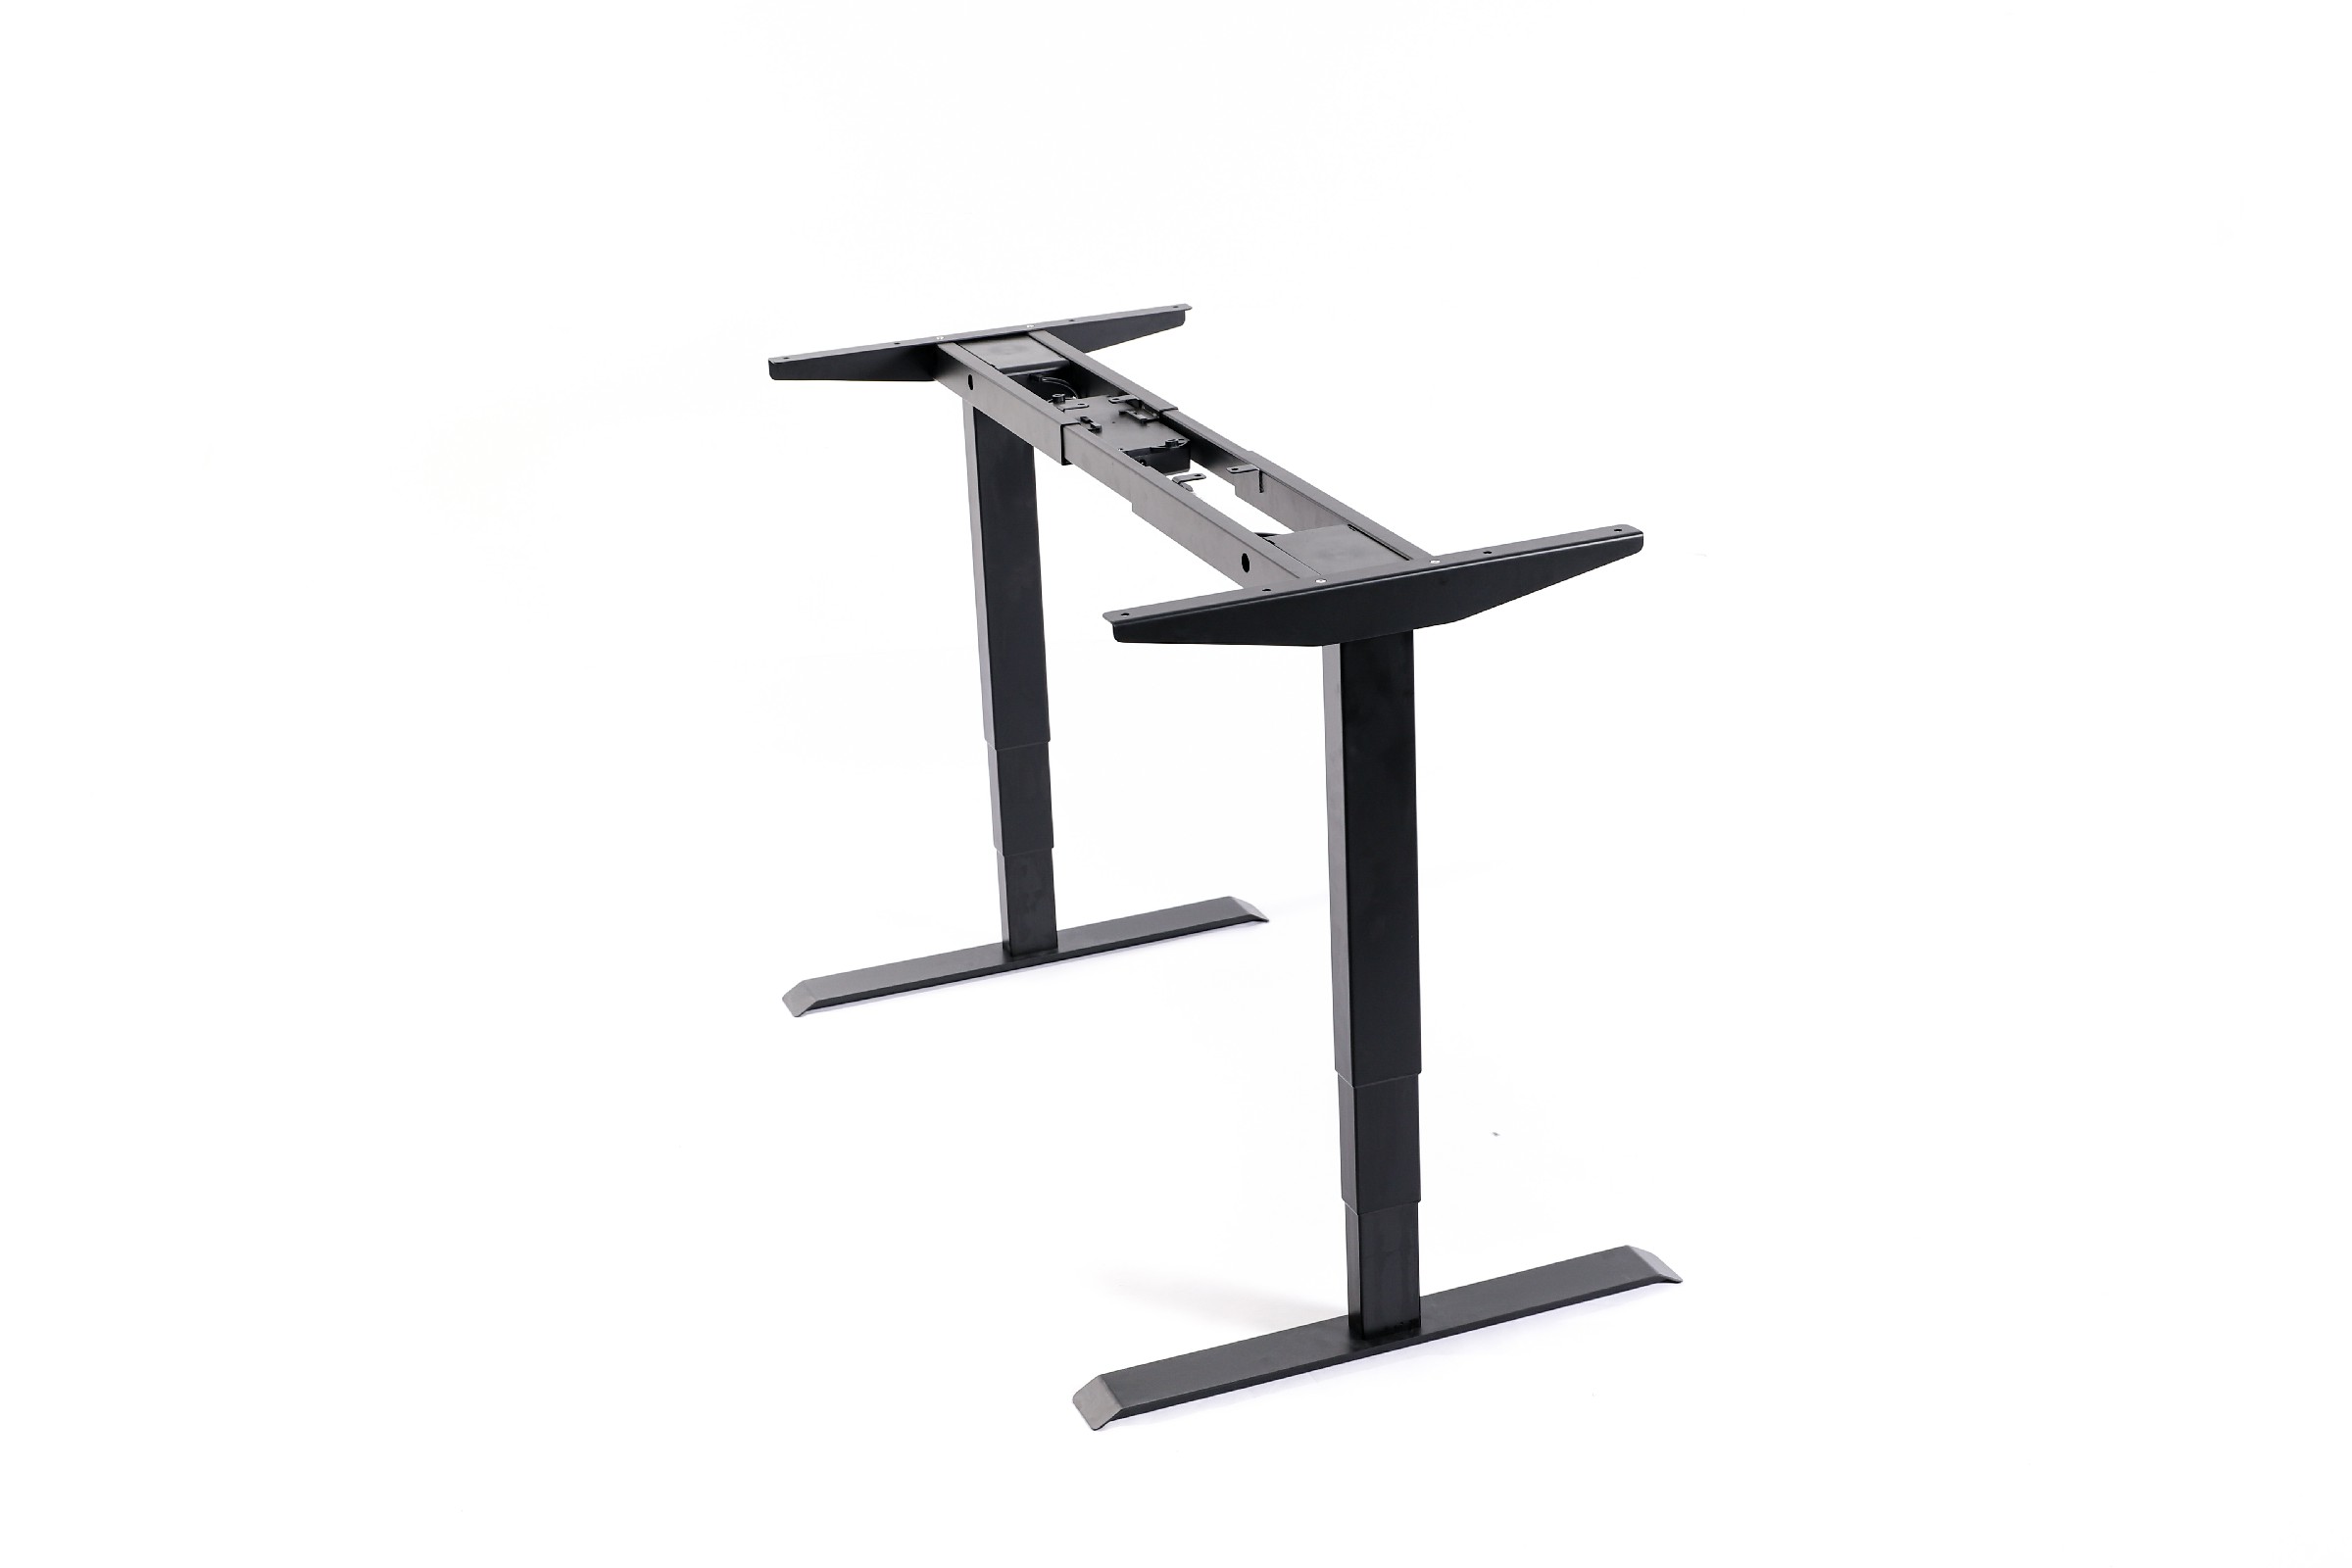 NT33-2AR2 Sit Stand Desk 2022 Office Furniture Adjustable Height Standing Desk with Dual Motors